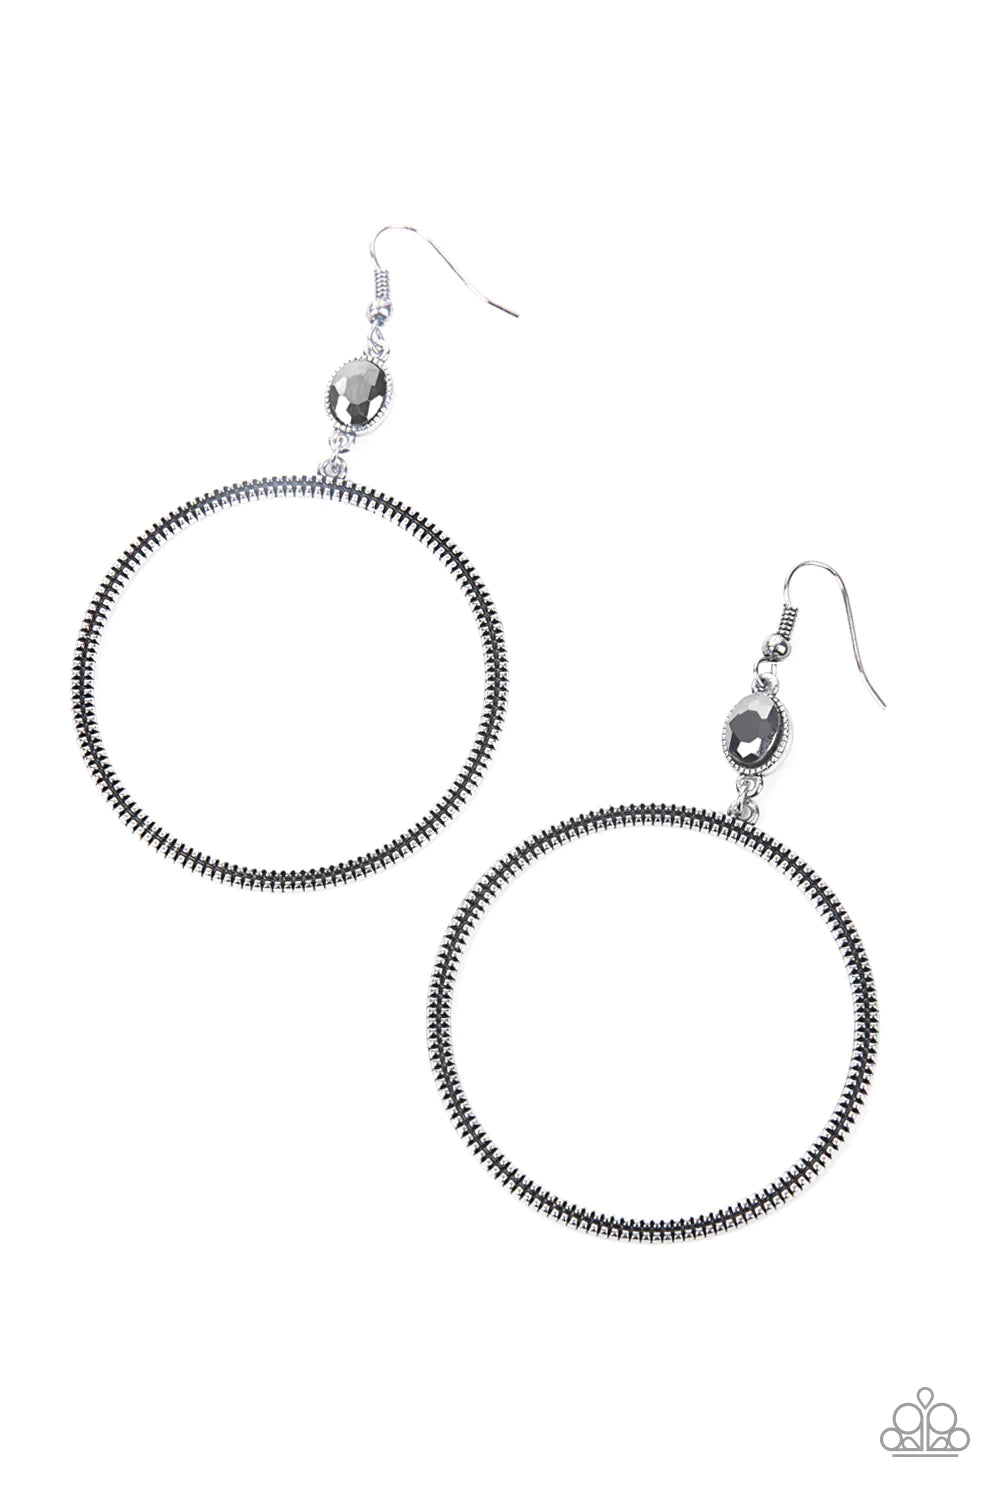 Paparazzi Accessories Work That Circuit - Silver A slim oversized silver ring, highlighted by two concentric circles of dotted texture, dangles from an oval hematite gem for an edgy refined look. Earring attaches to a standard fishhook fitting. Sold as on